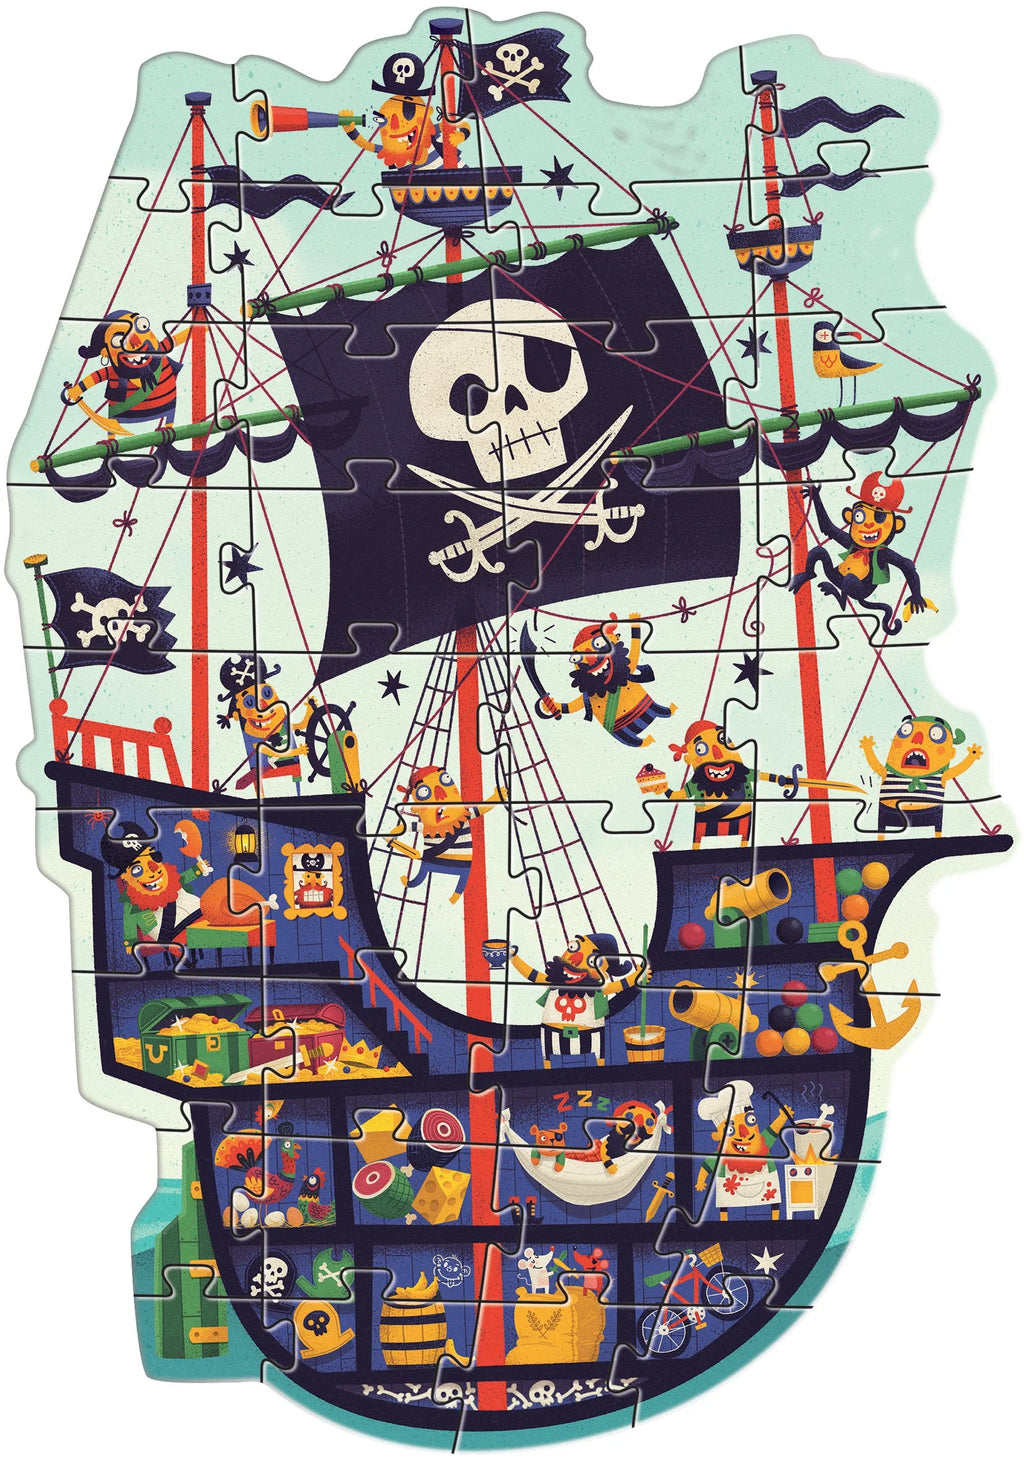 The Pirate Ship Giant Floor Jigsaw Puzzle